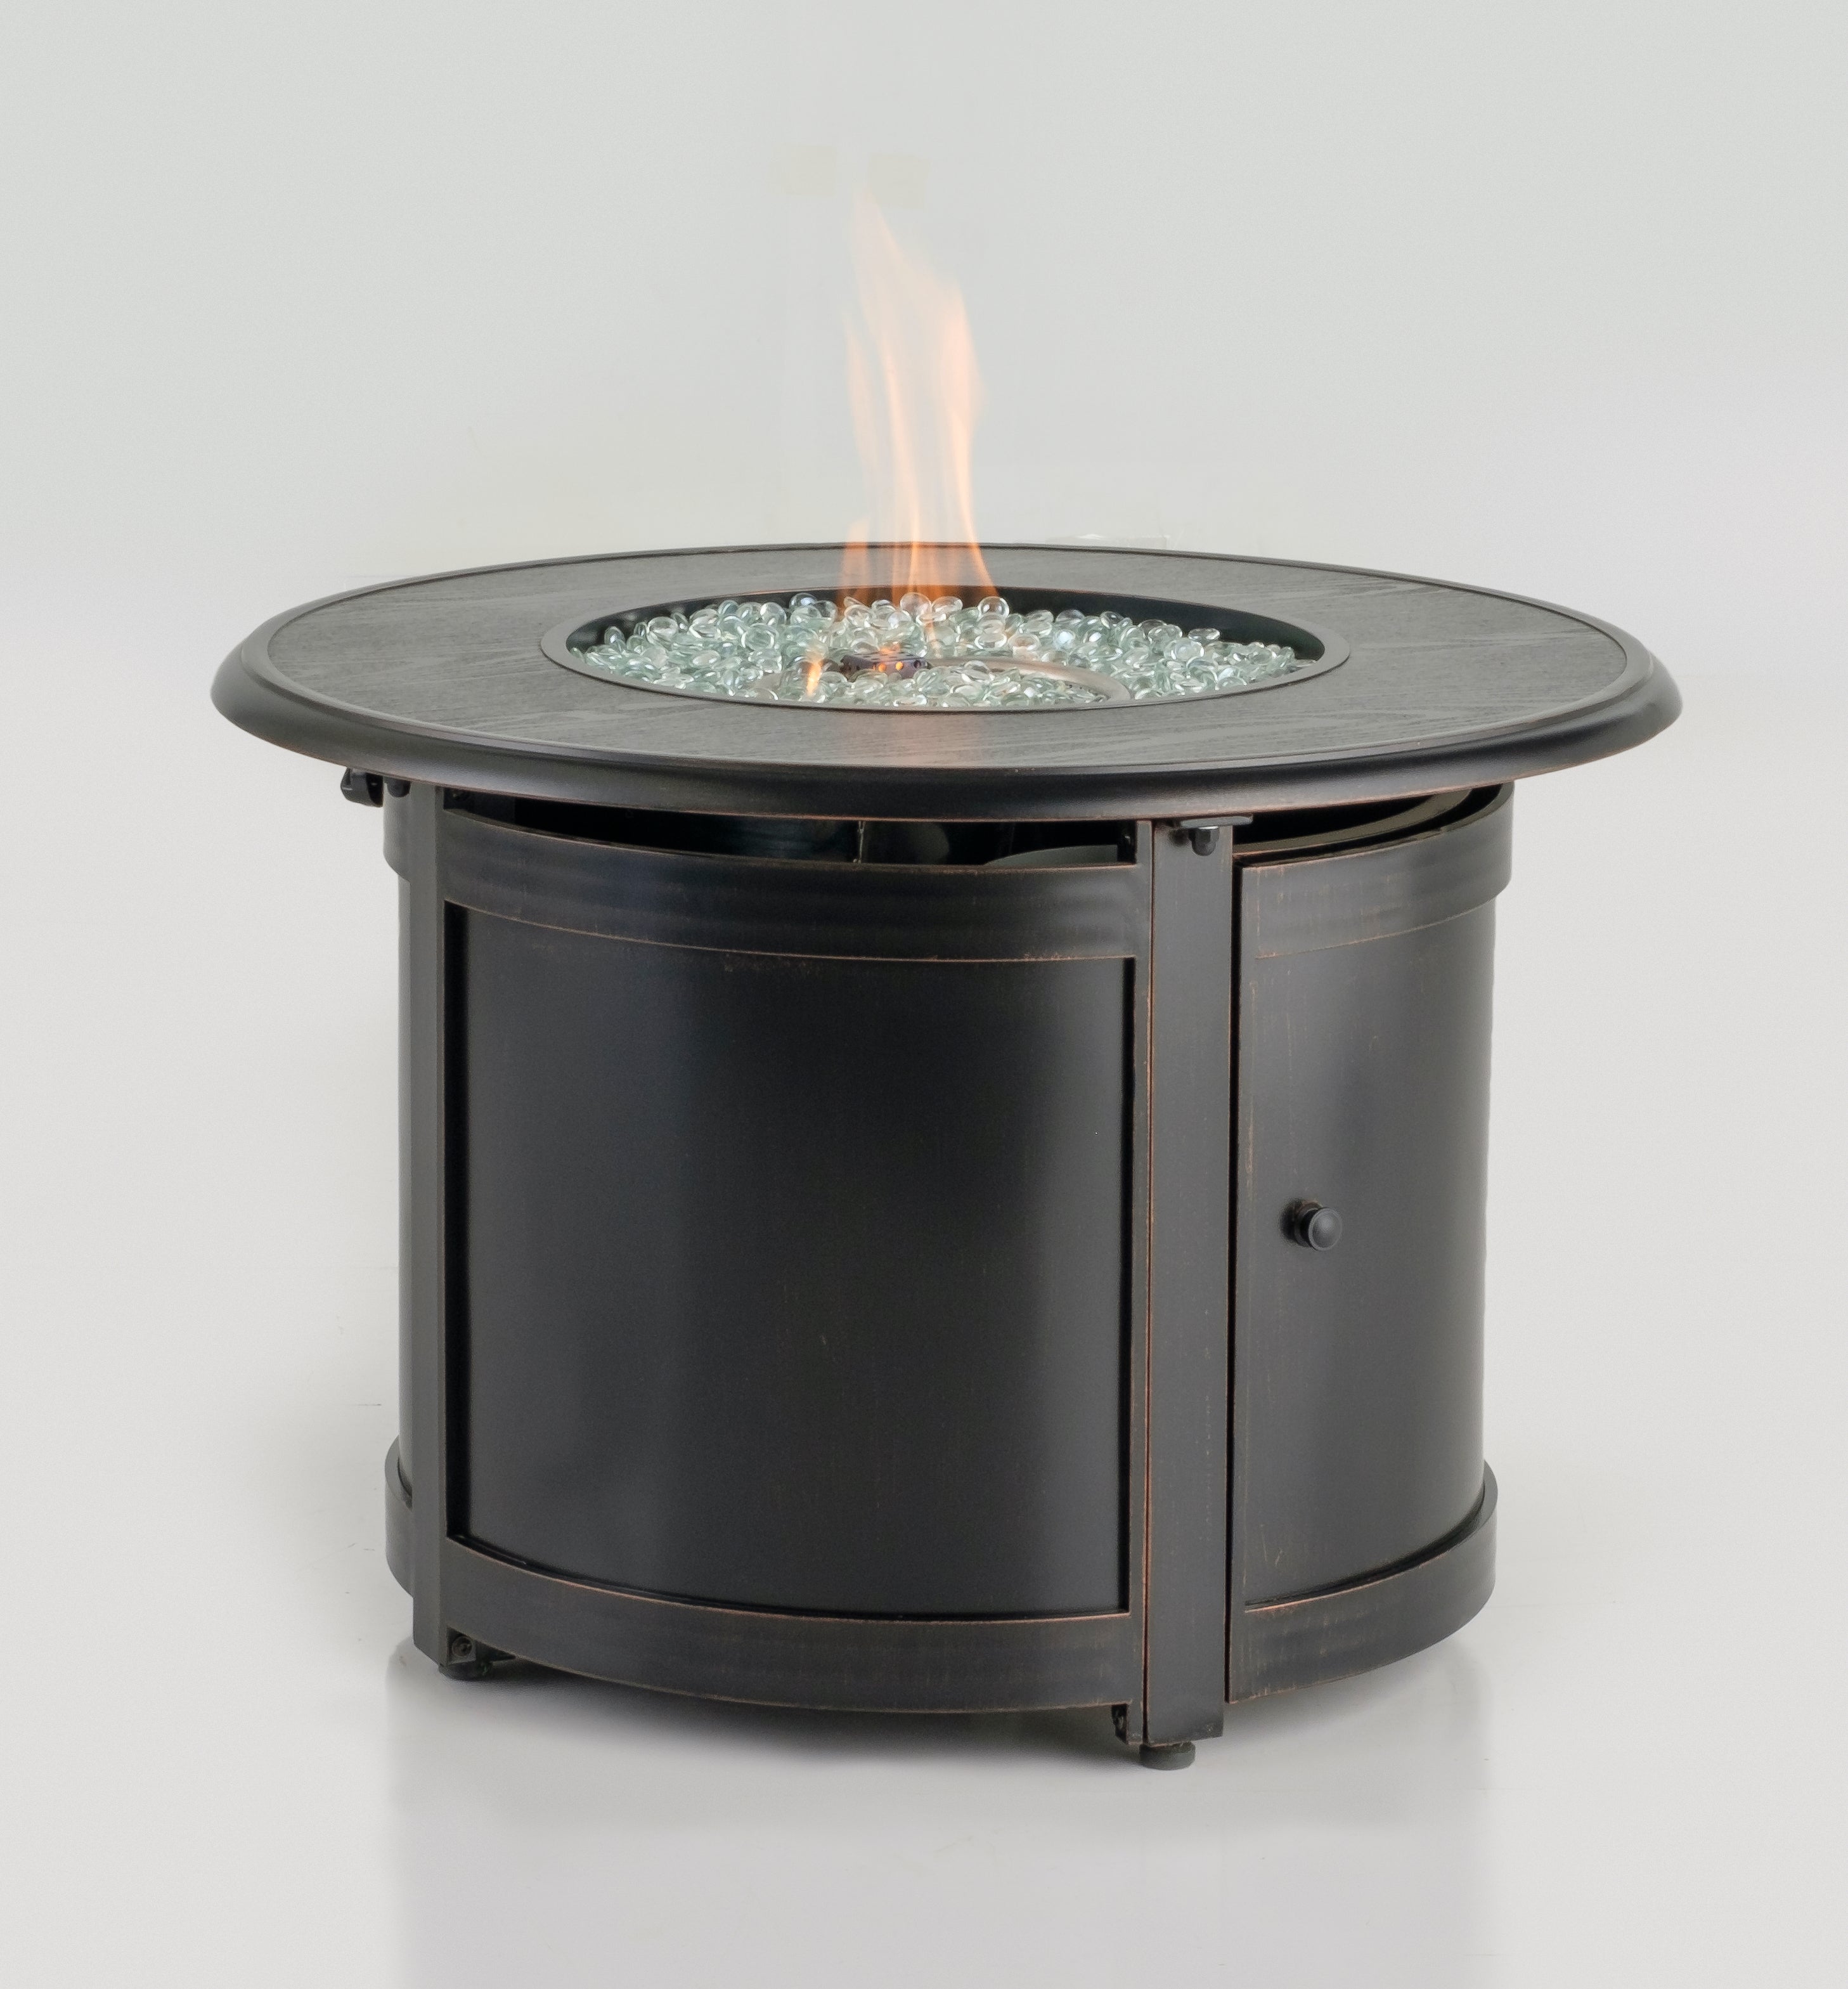 Alfresco Home Manchester 36' Blacksmith Round Fire Pit Table